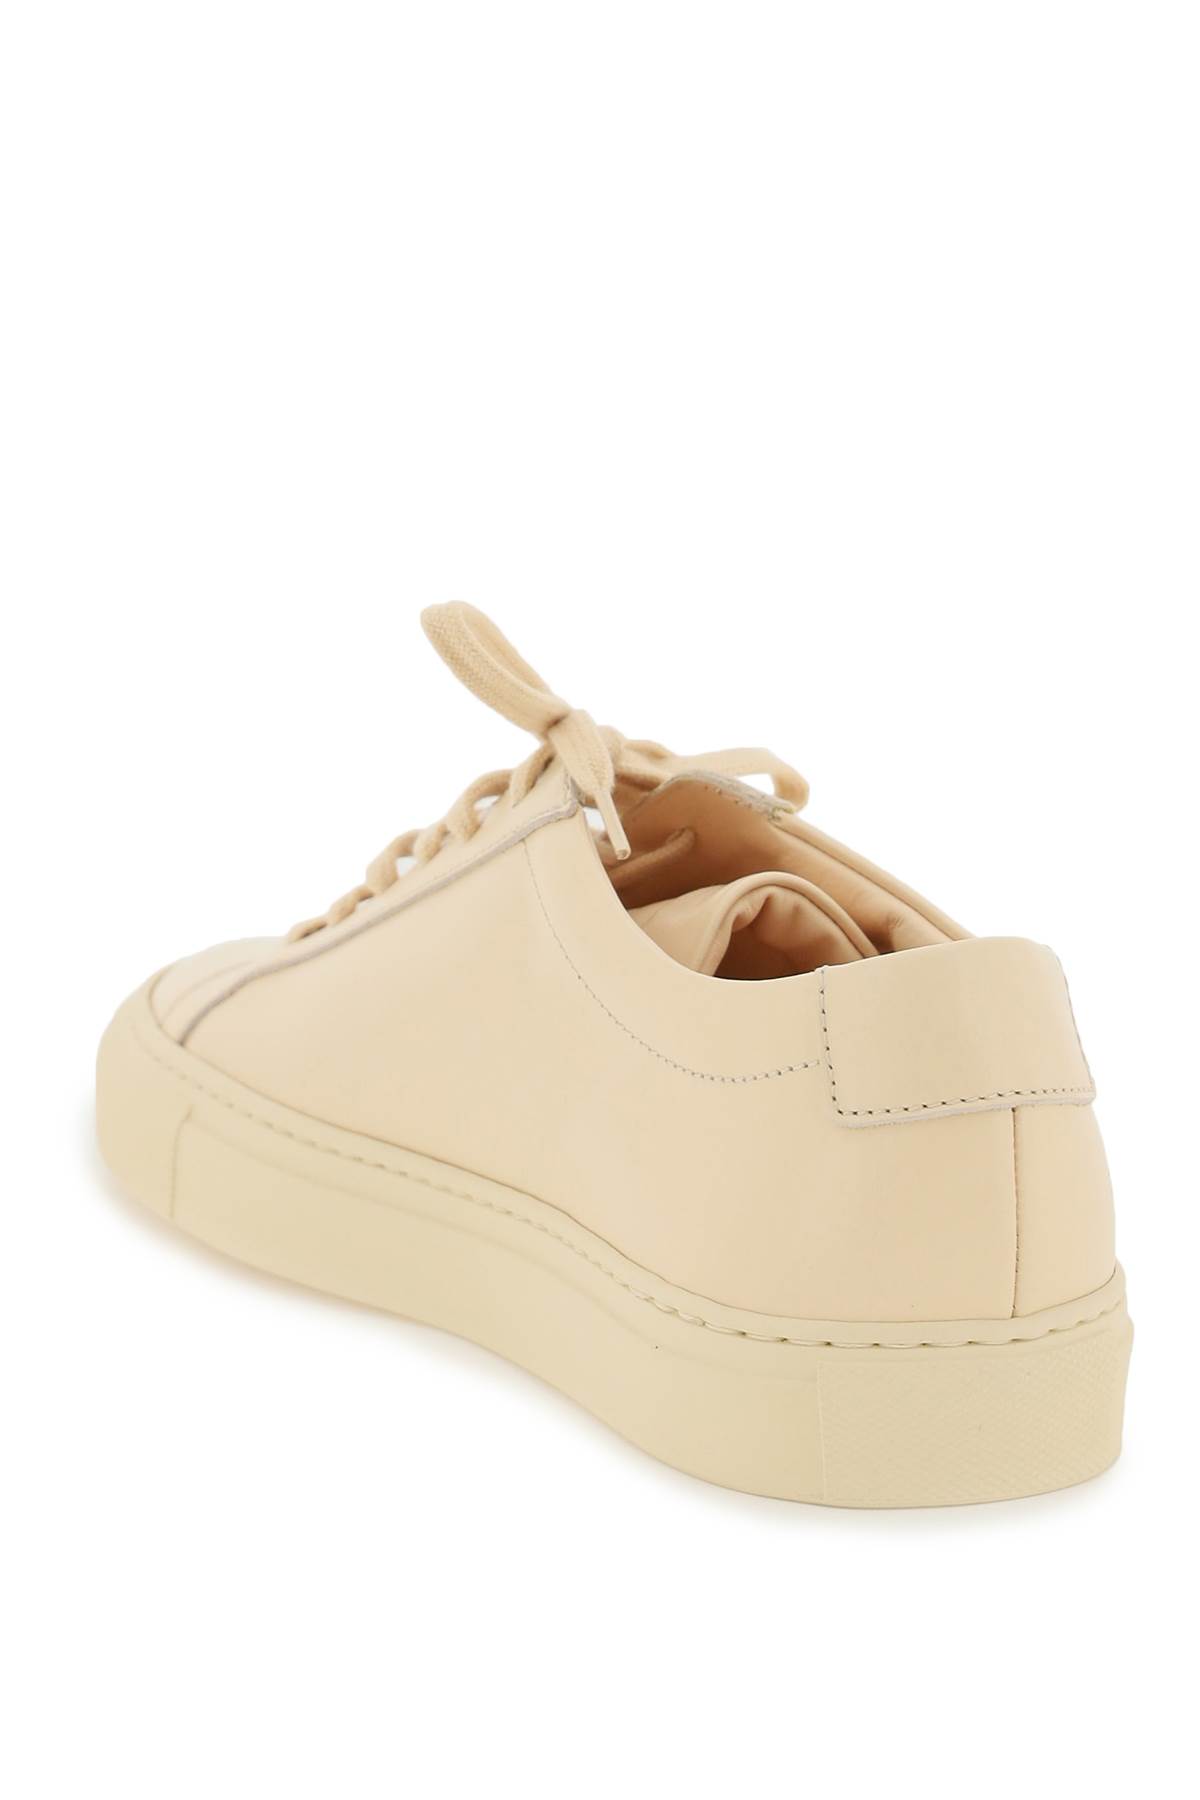 Shop Common Projects Original Achilles Leather Sneakers In Apricot (pink)